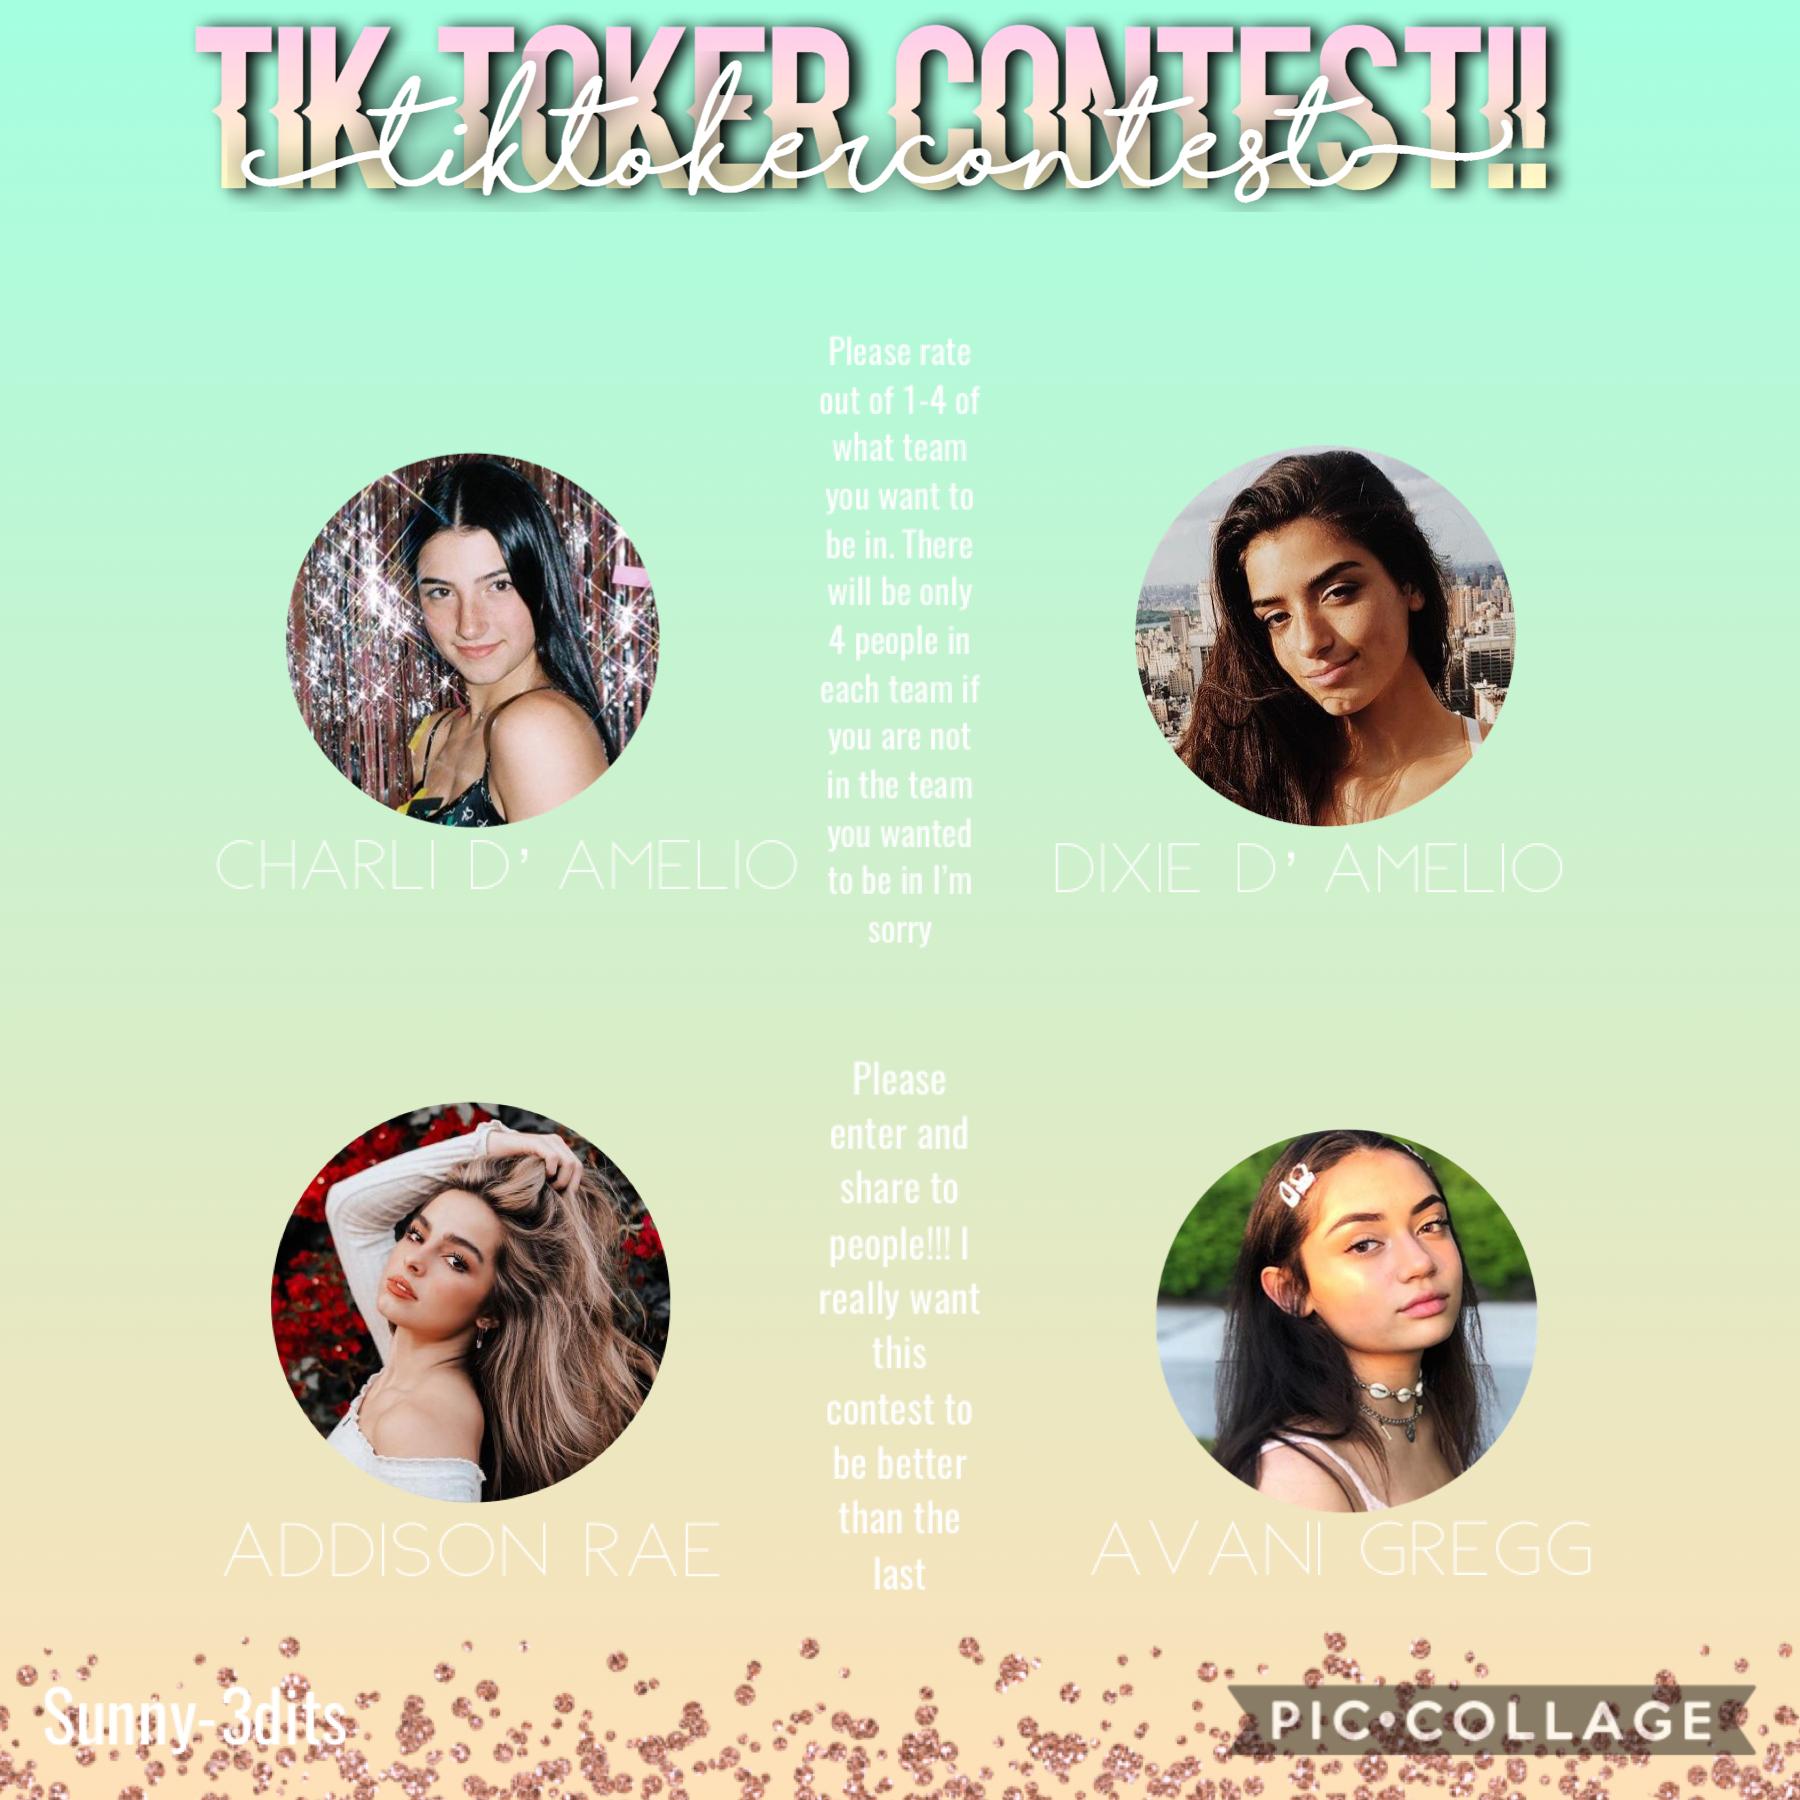 Please join and share the message! I have decided to do this contest because I haven’t had inspiration with collages and I am bored all the time sooo